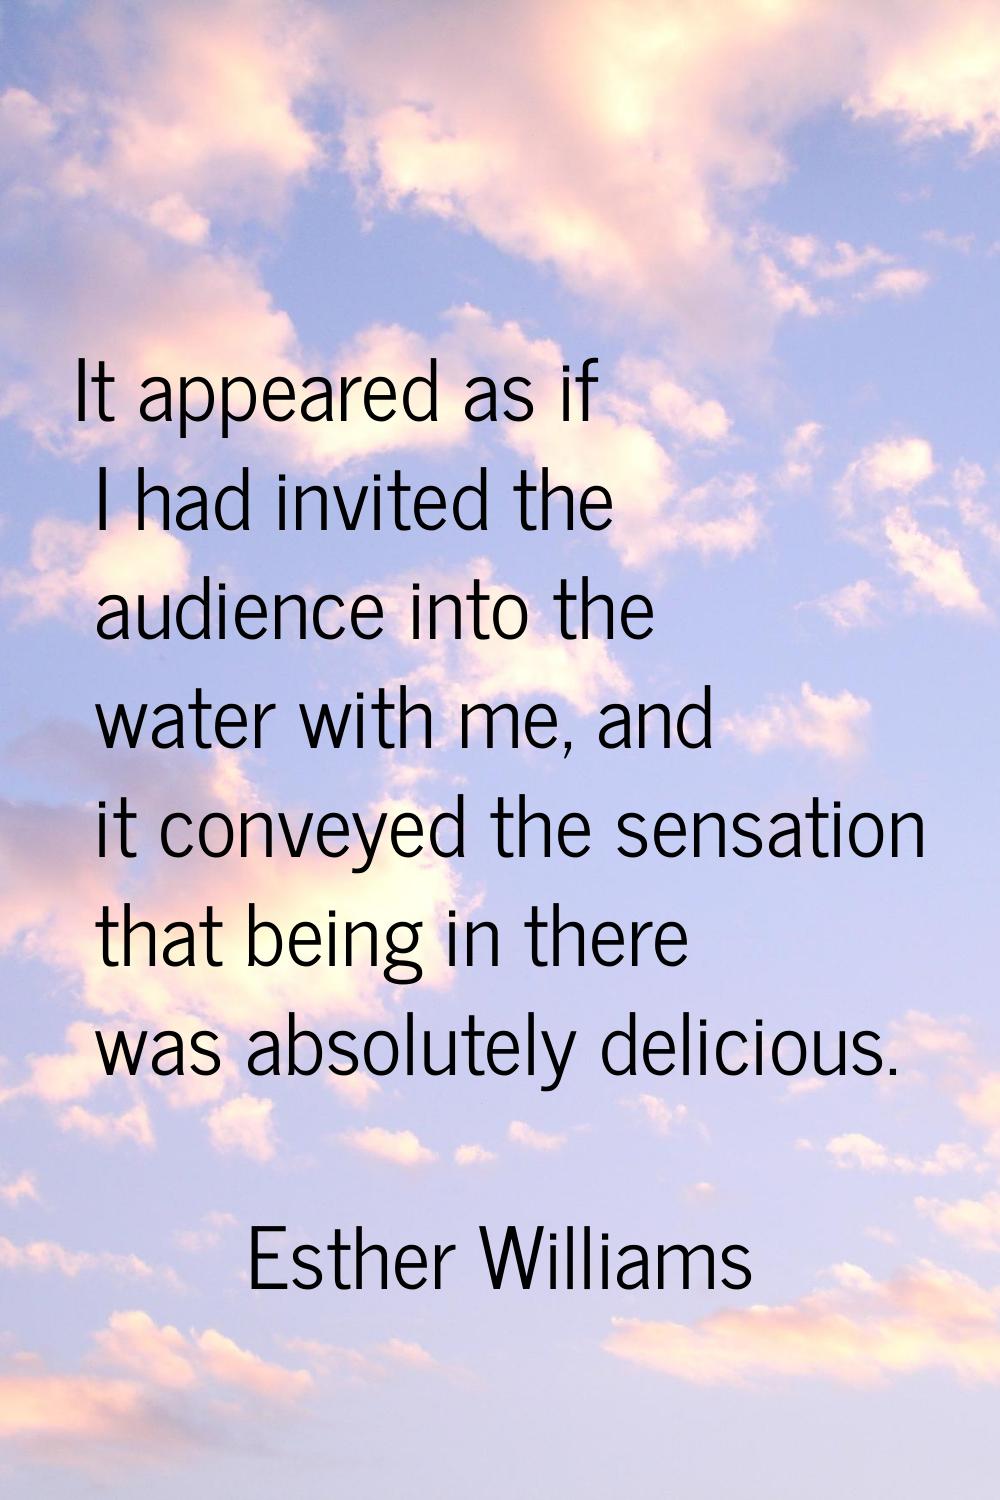 It appeared as if I had invited the audience into the water with me, and it conveyed the sensation 